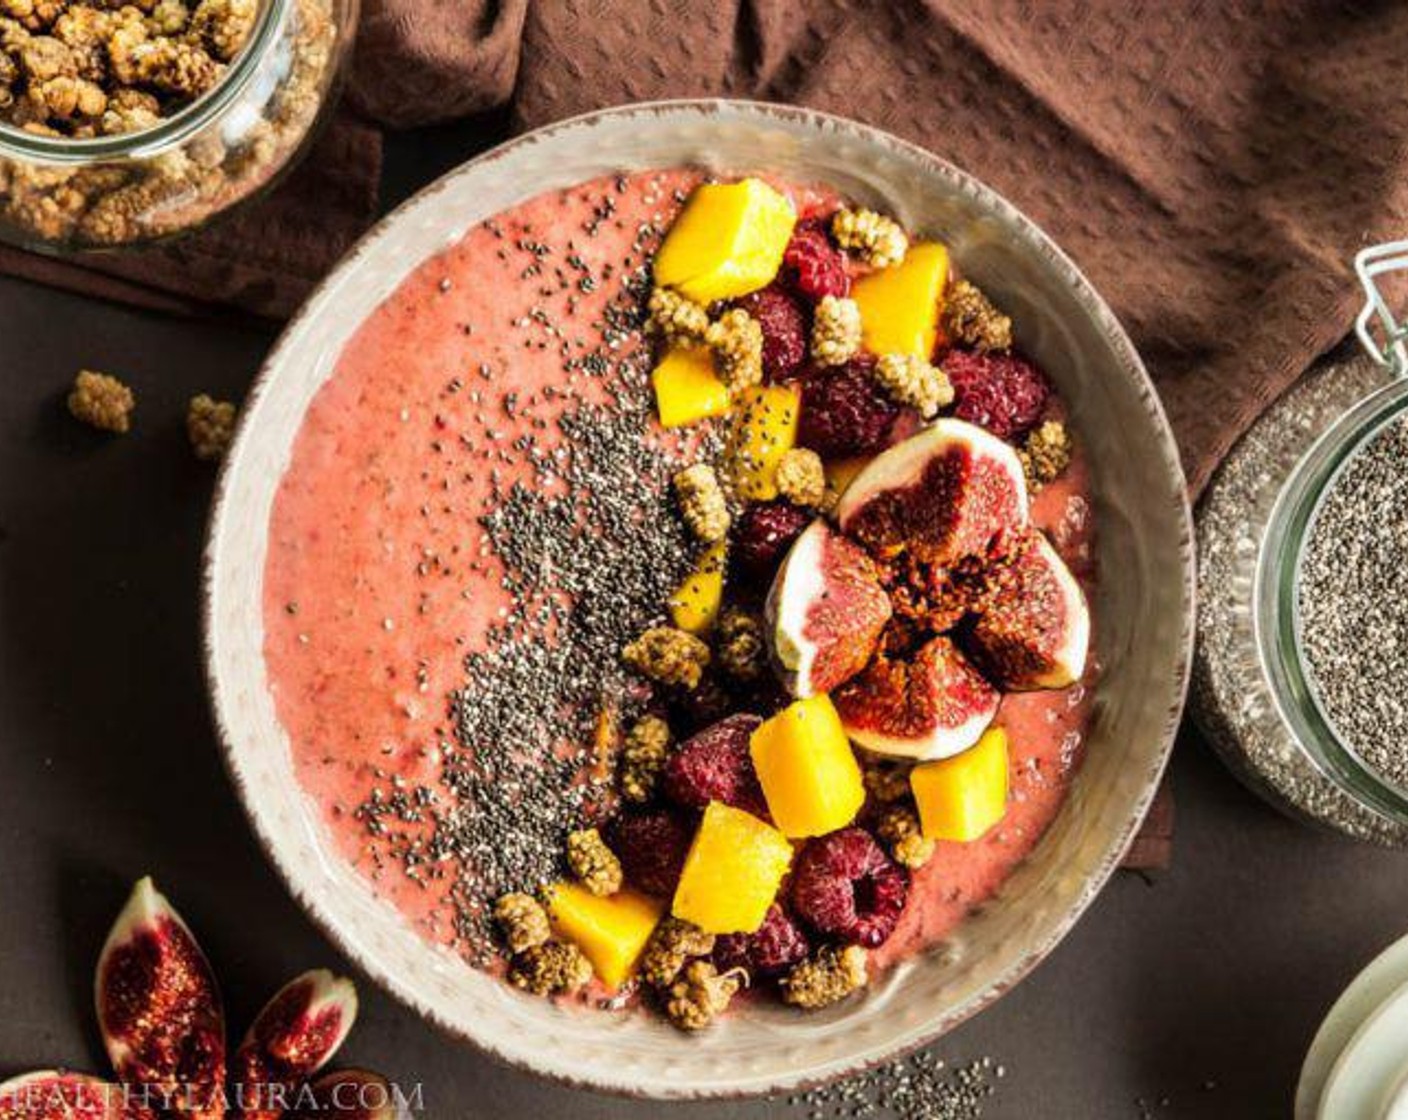 Raspberry and Mango Bowl with Mulberries